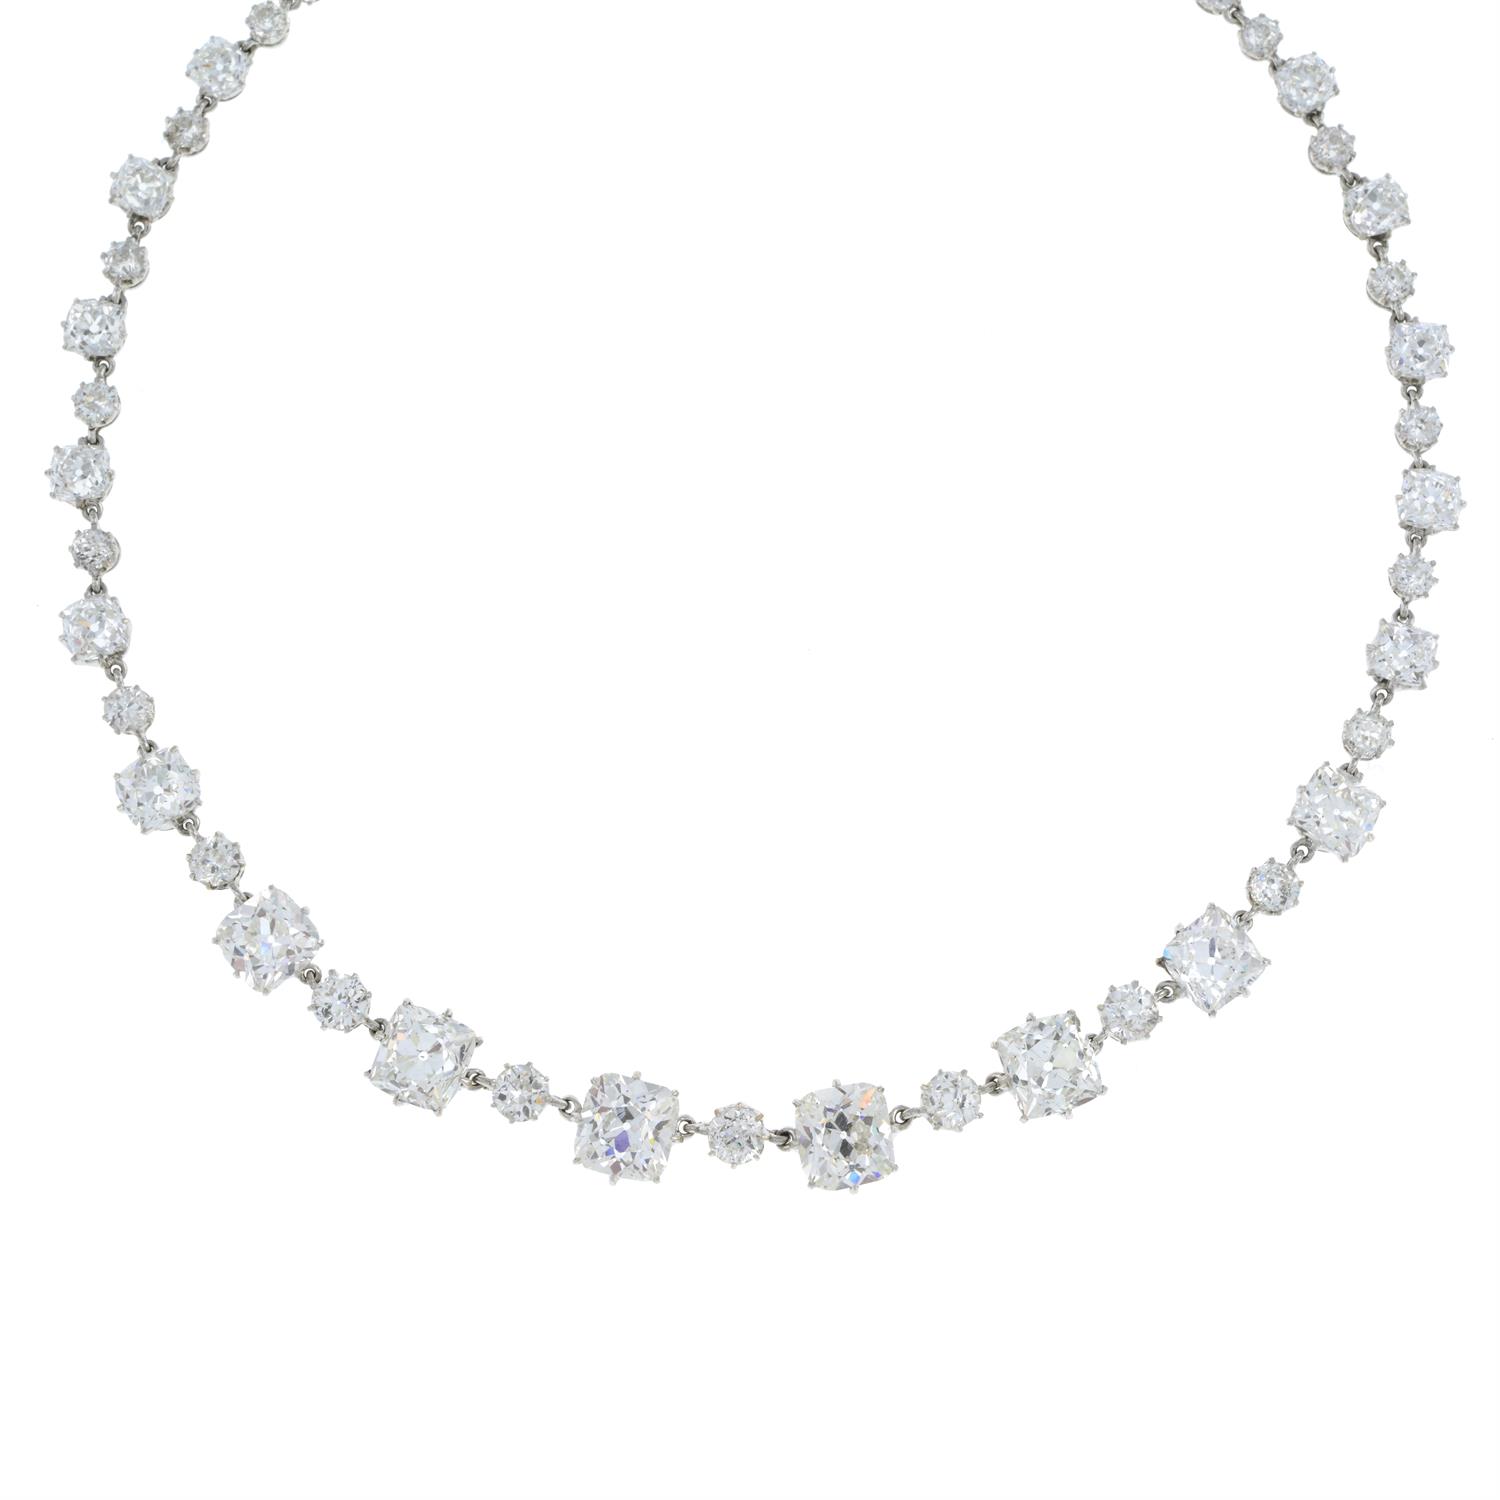 Early 20th century graduated diamond line necklace - Image 4 of 7